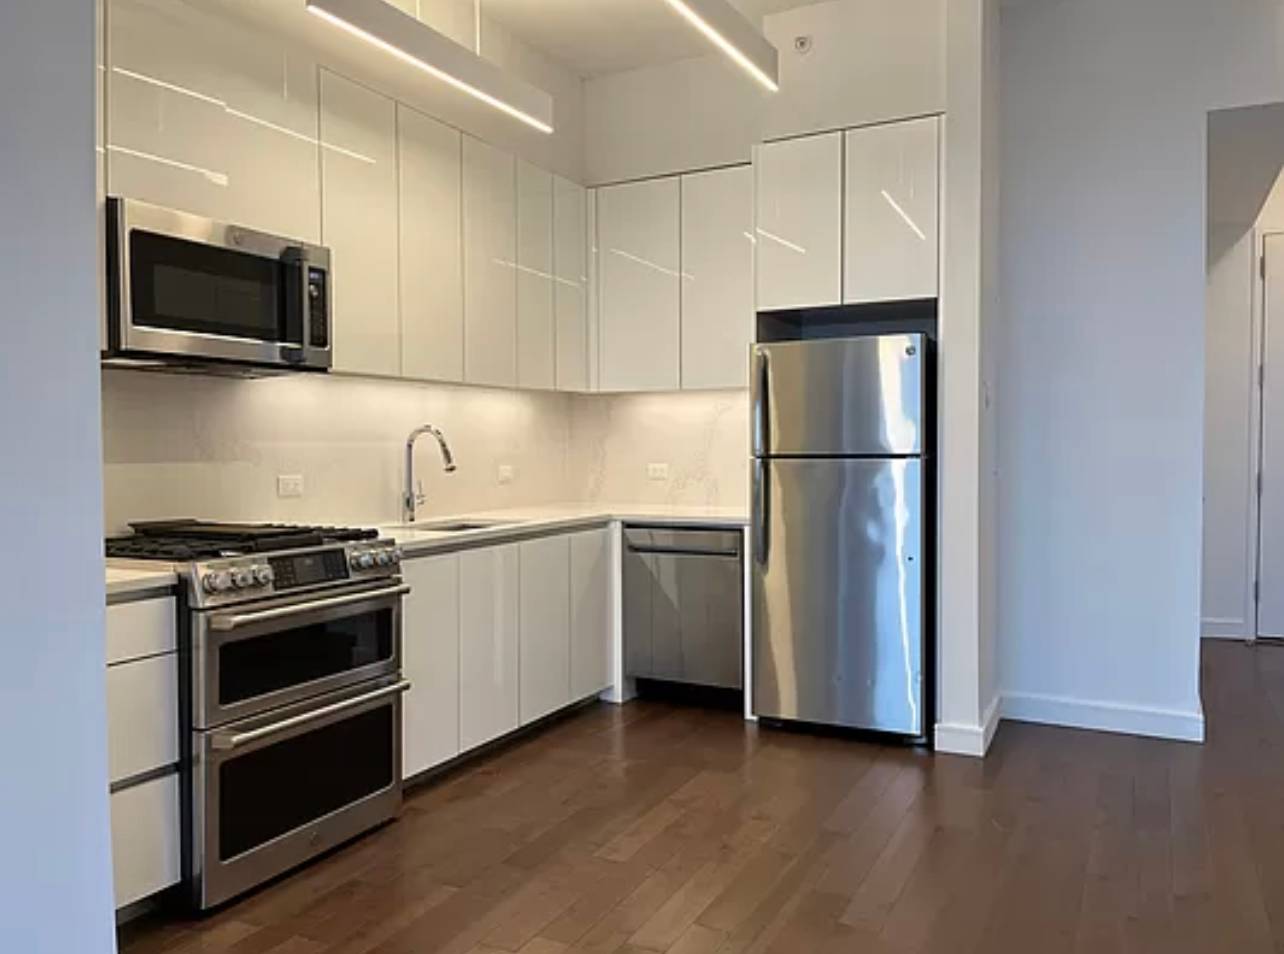 No Fee, Gorgeous Studio Apartment in Full Service Clinton Building, W/D in Unit